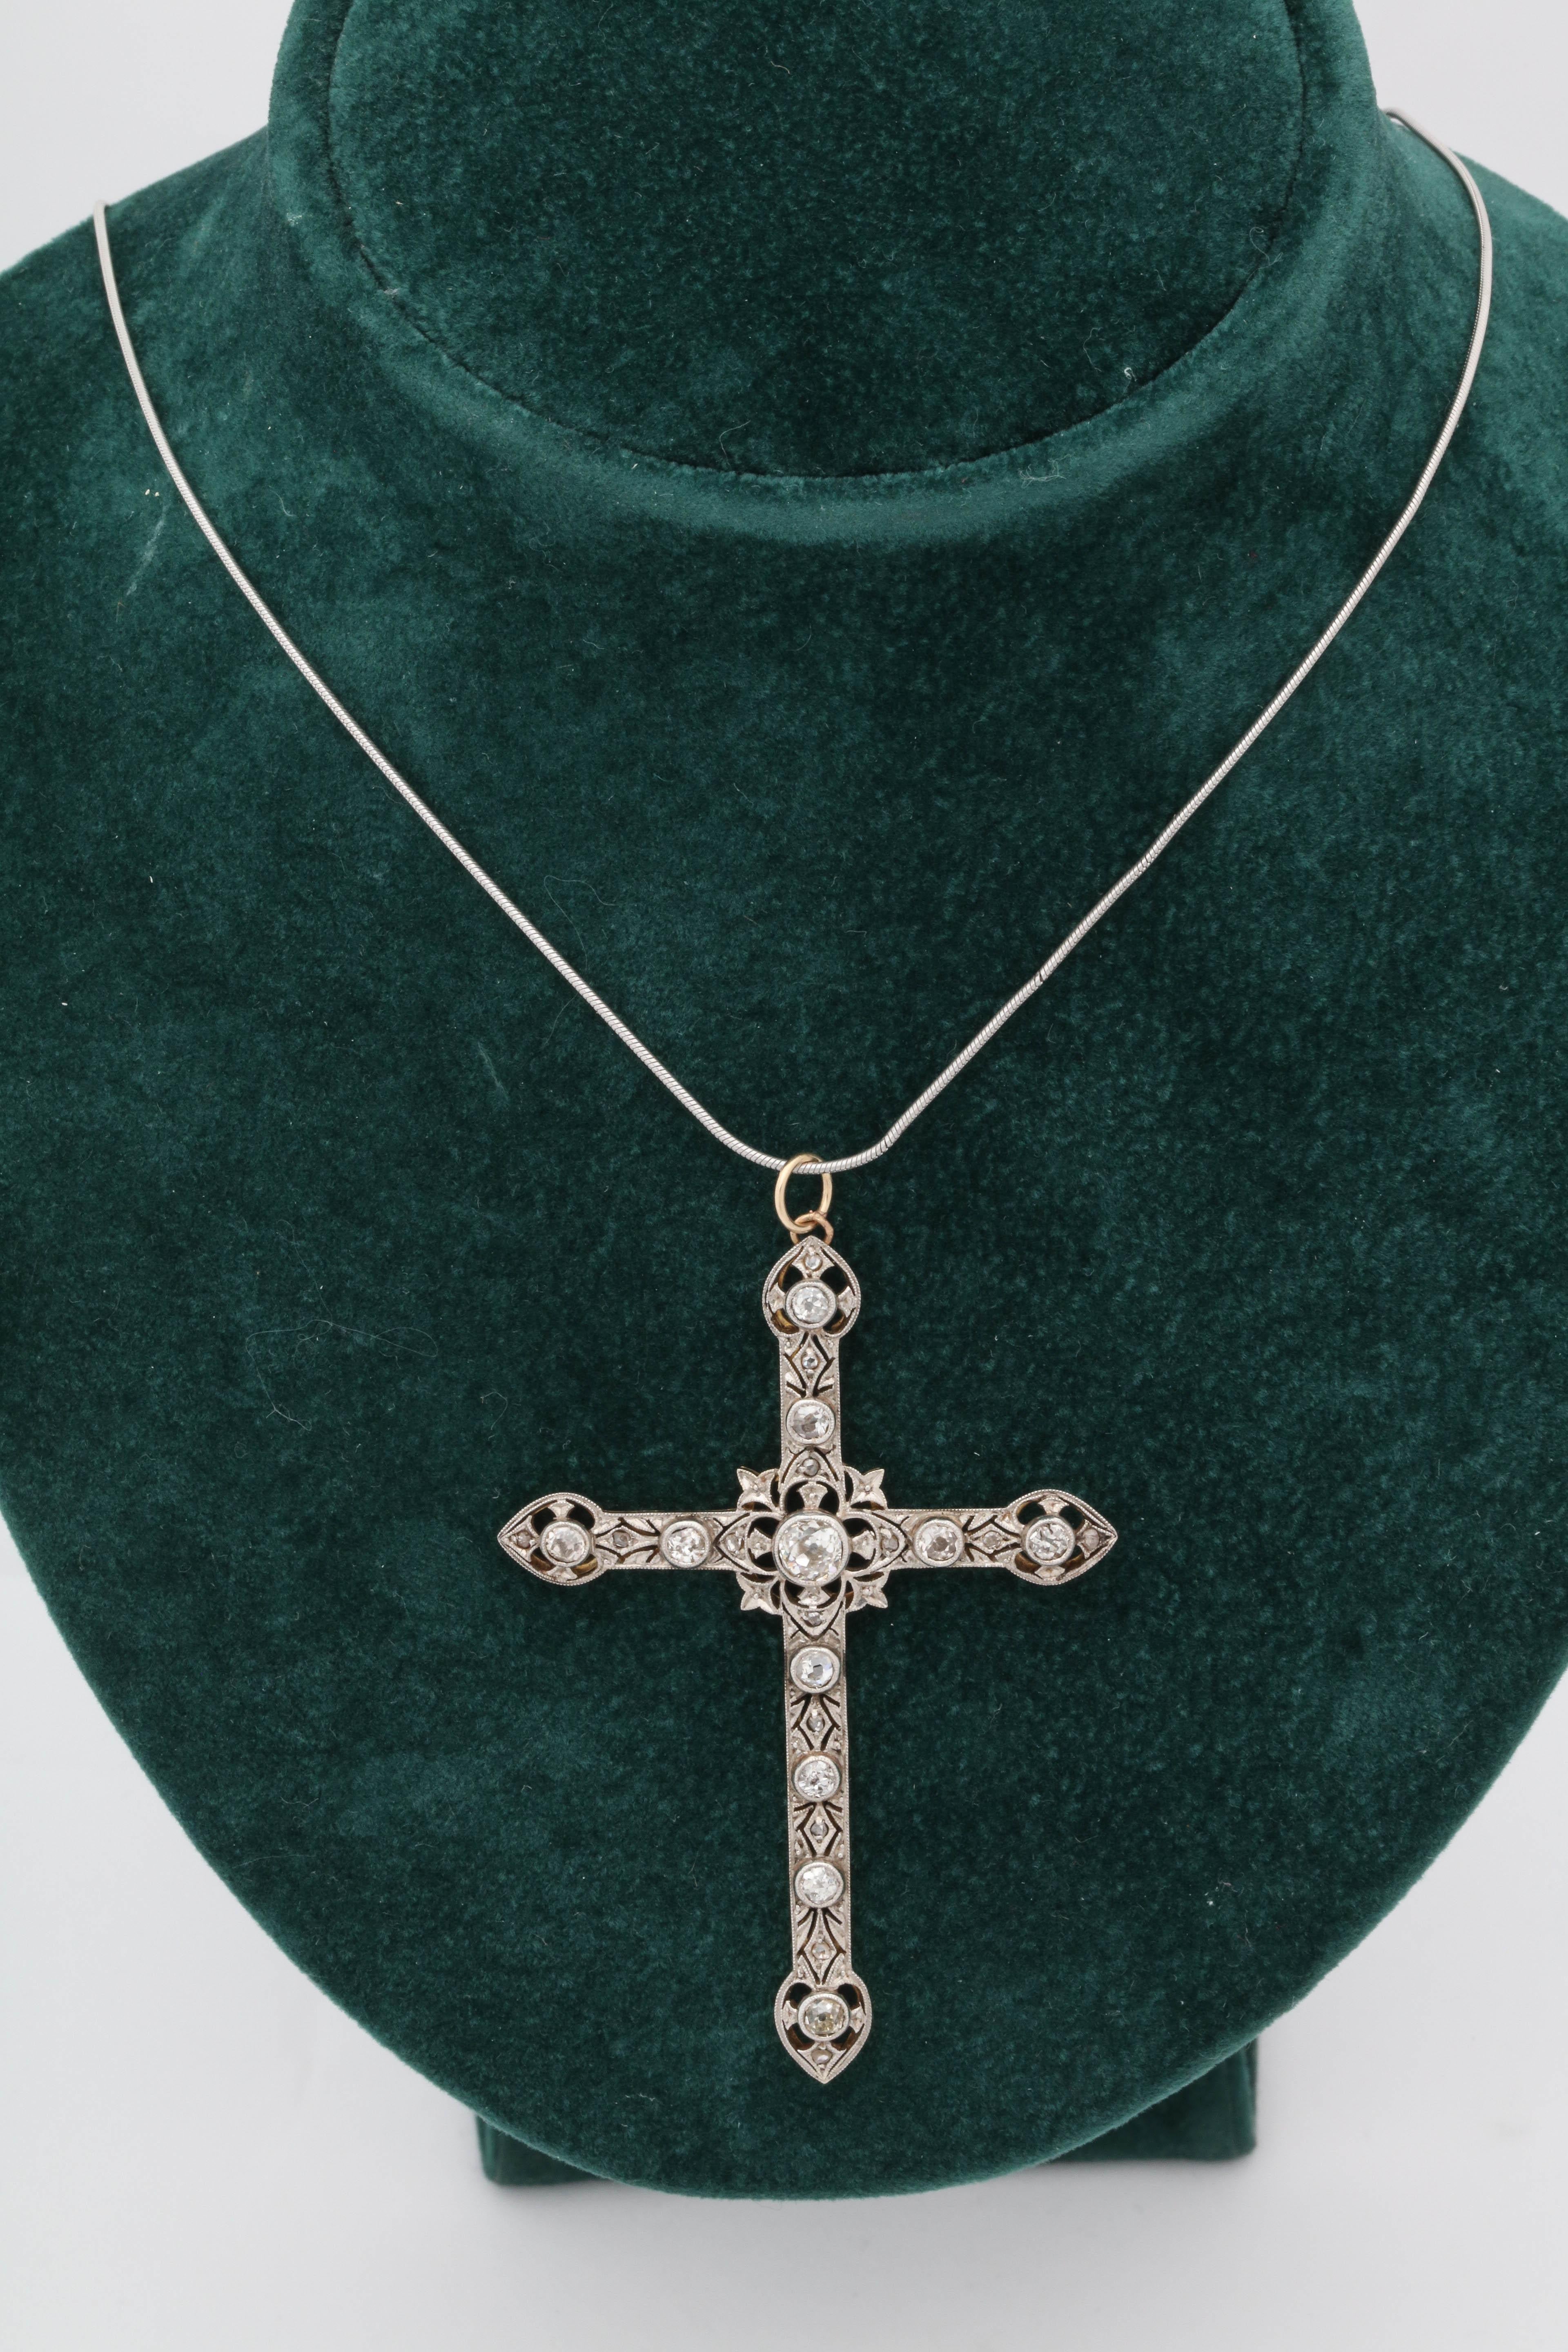 One Ladies Cross Pendant Handmade In Platinum And Diamonds And 18kt Gold Back With 18kt Gold Bail. Approximate Diamond Weight 1.75 Carats , Center Stone Weight Approximately .50 Old Mine Cut Diamond. Circa 1920's Made In The United States Of